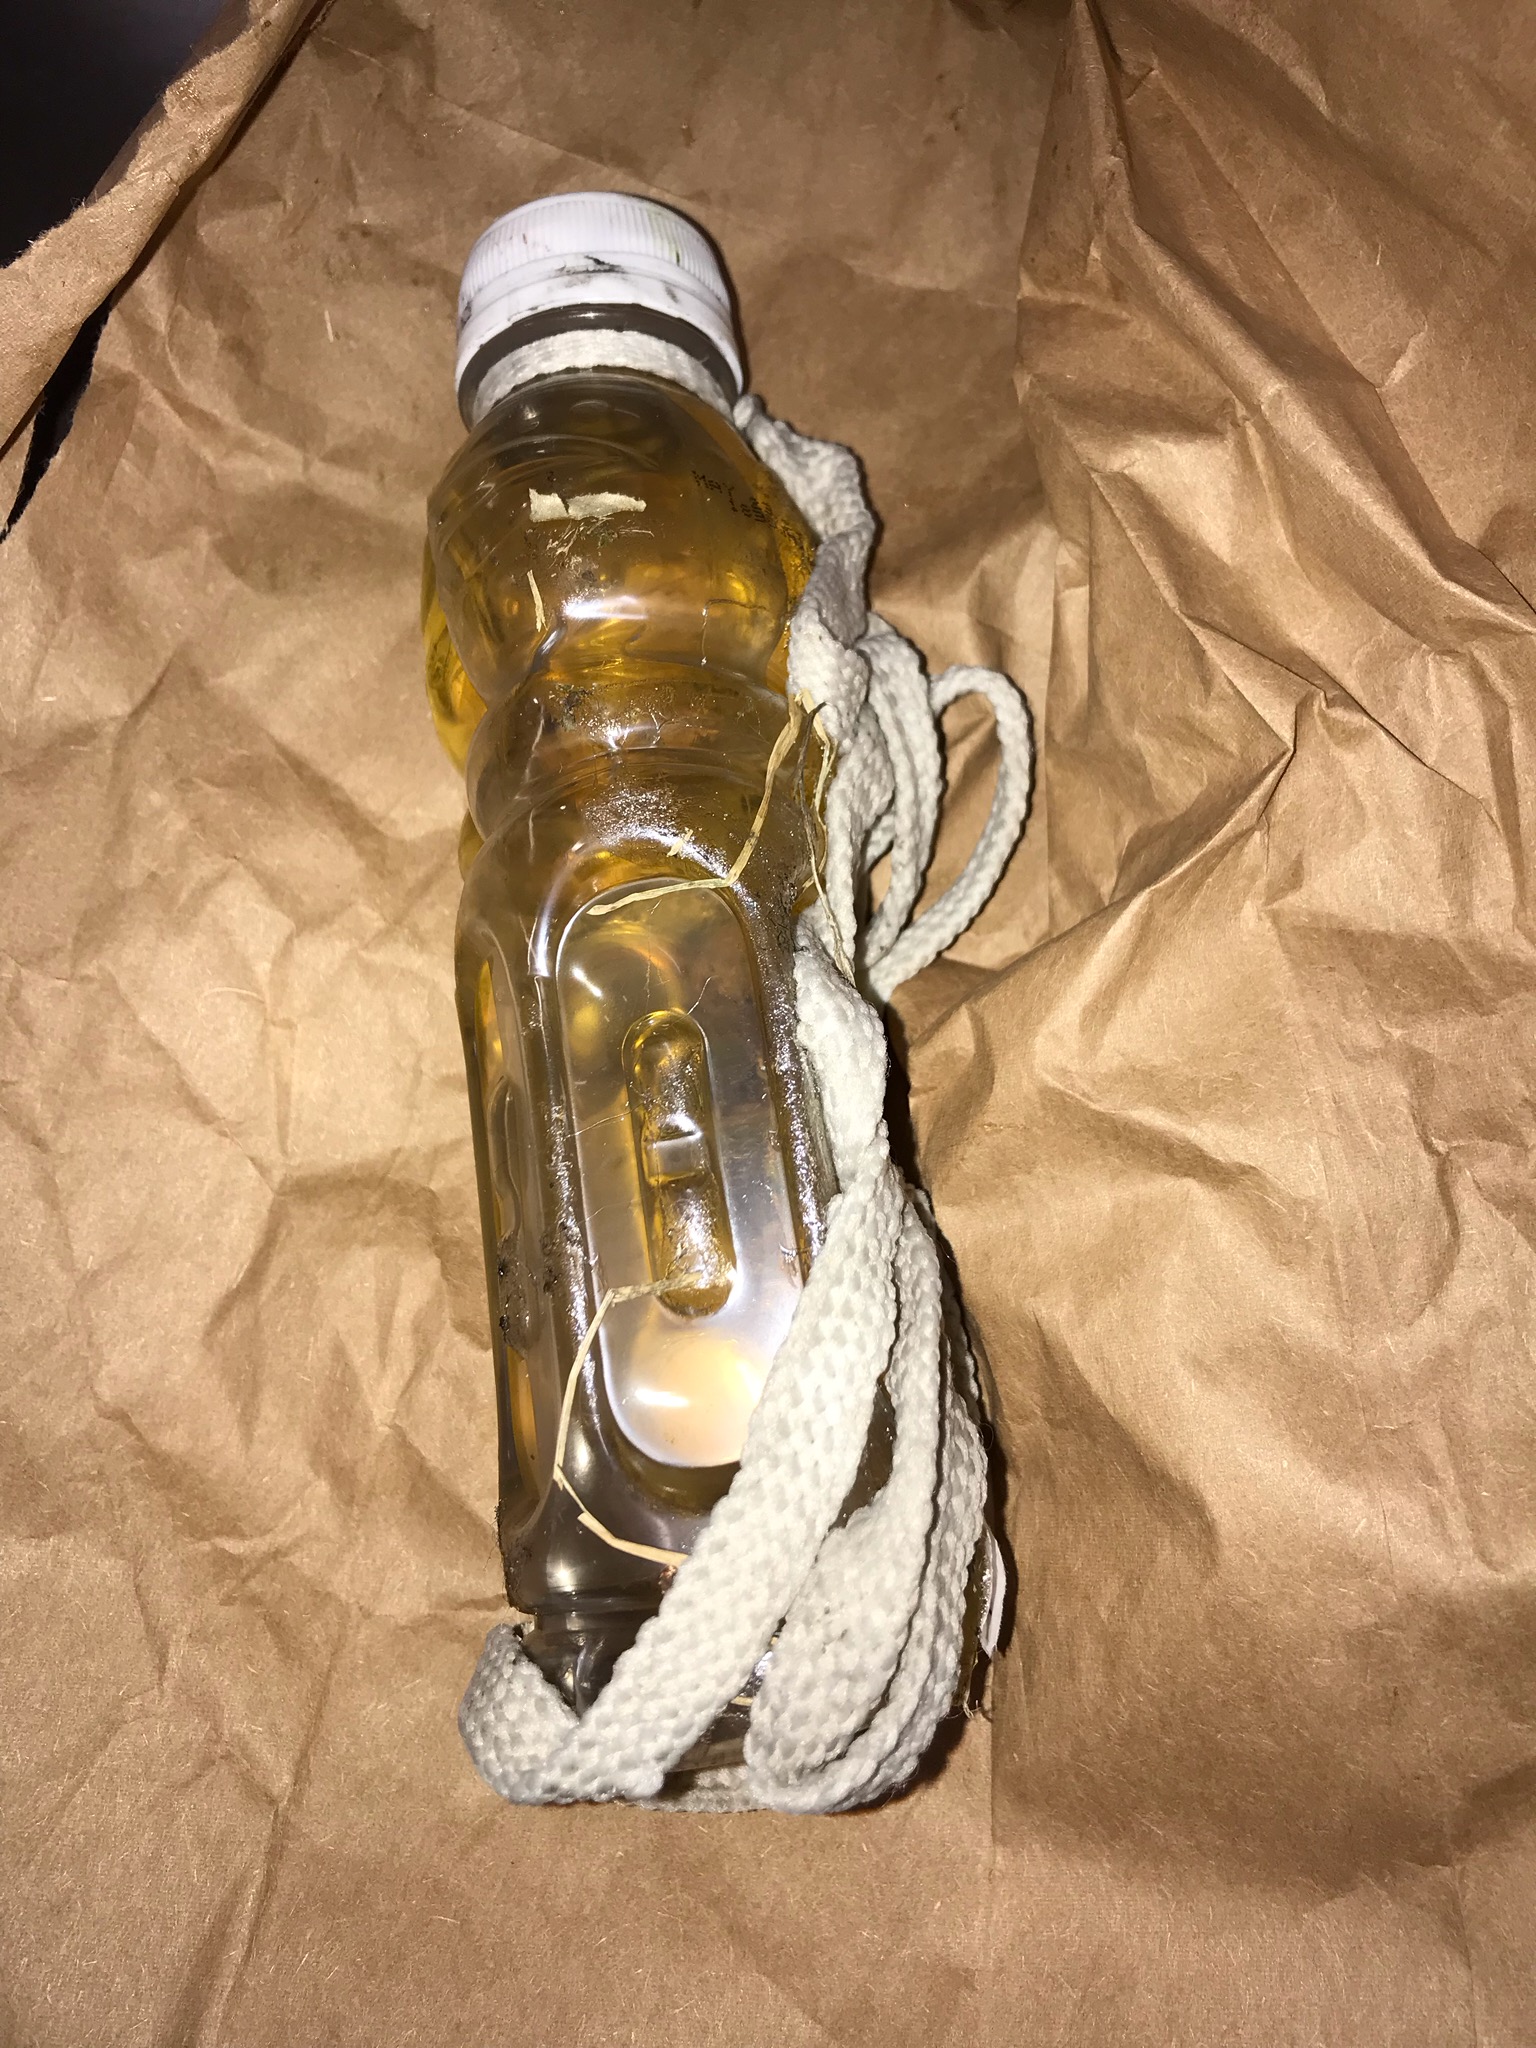 Bottle With String